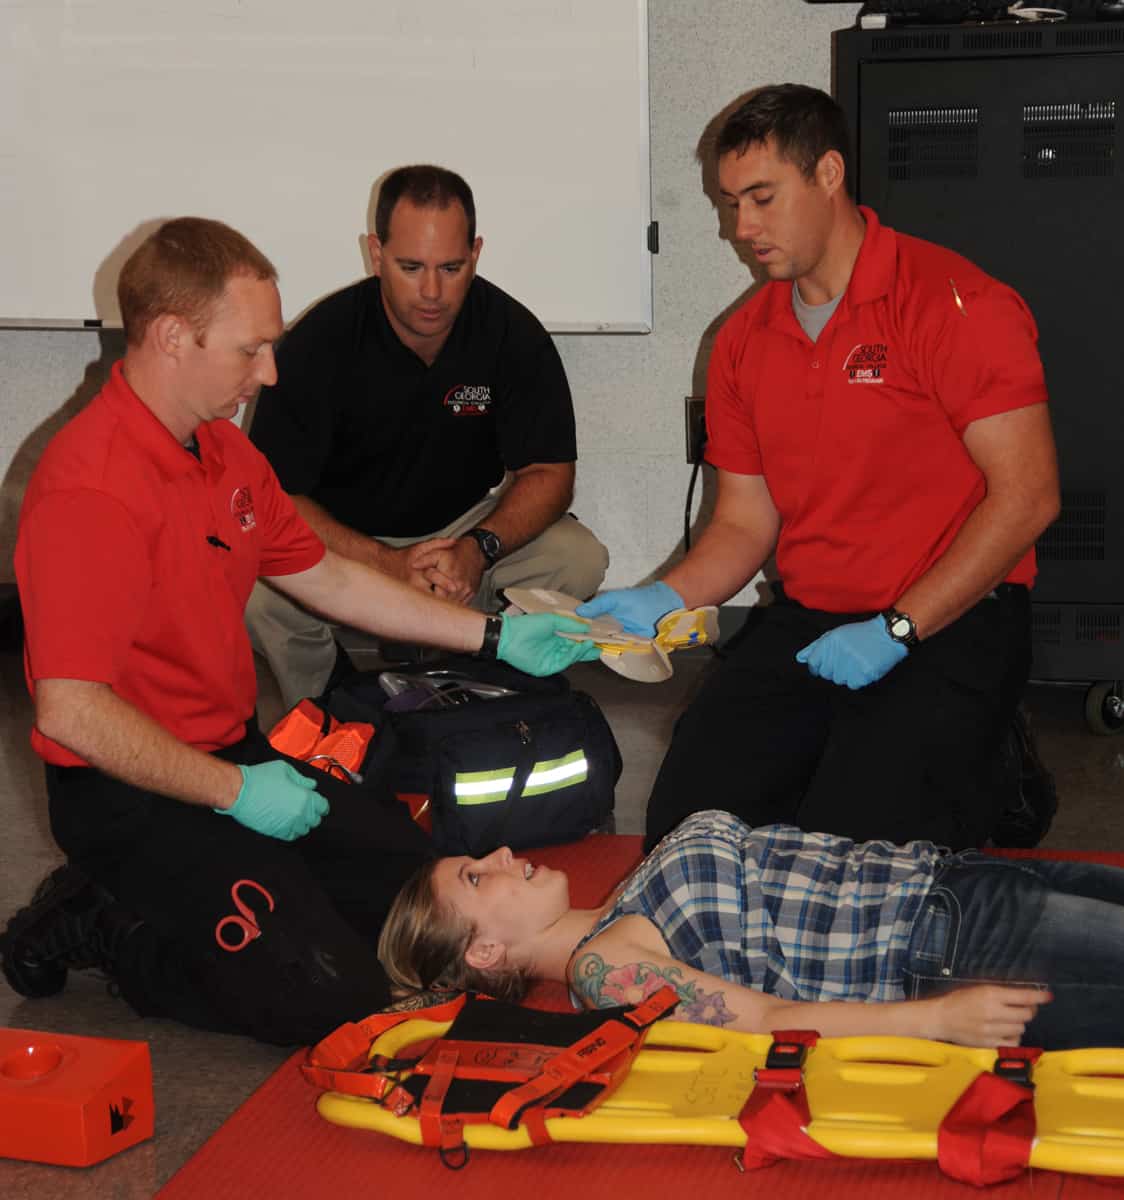 SGTC offering EMT classes to high school students.